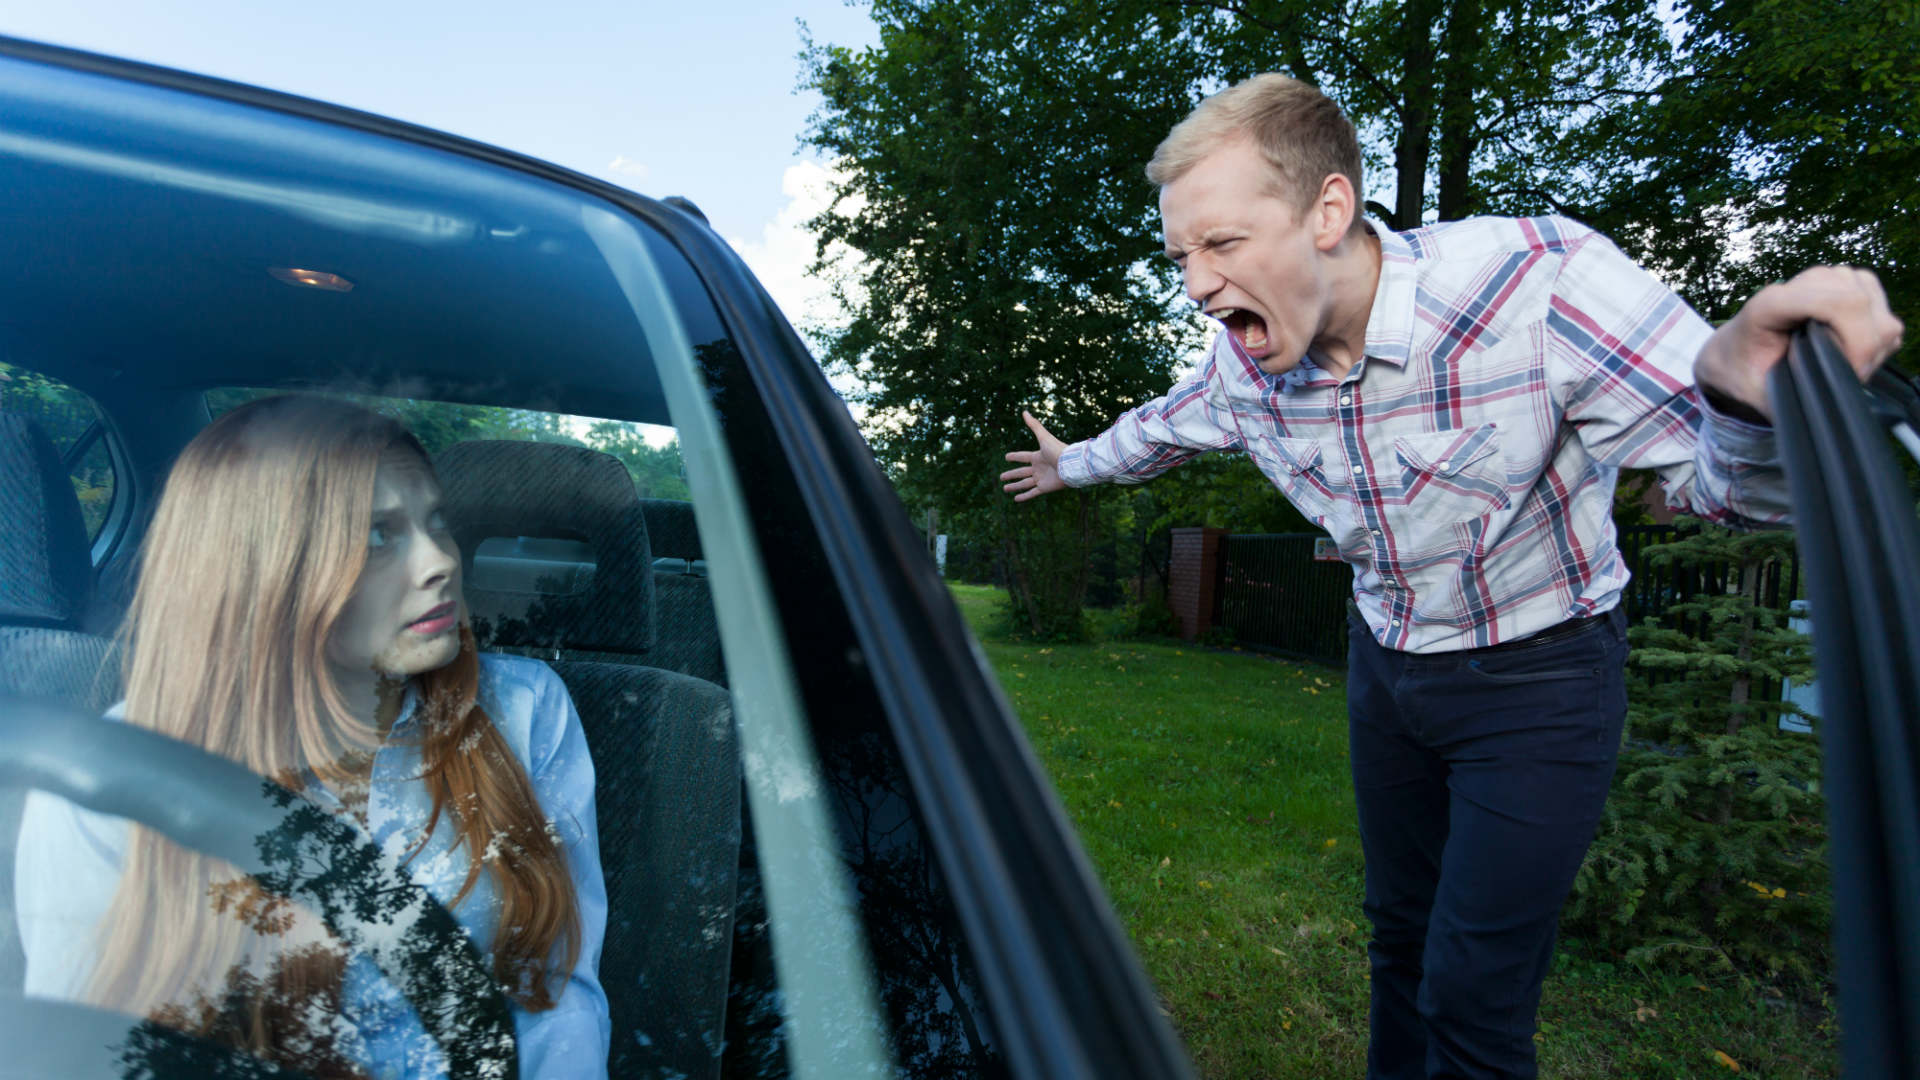 How to avoid a victim of road rage